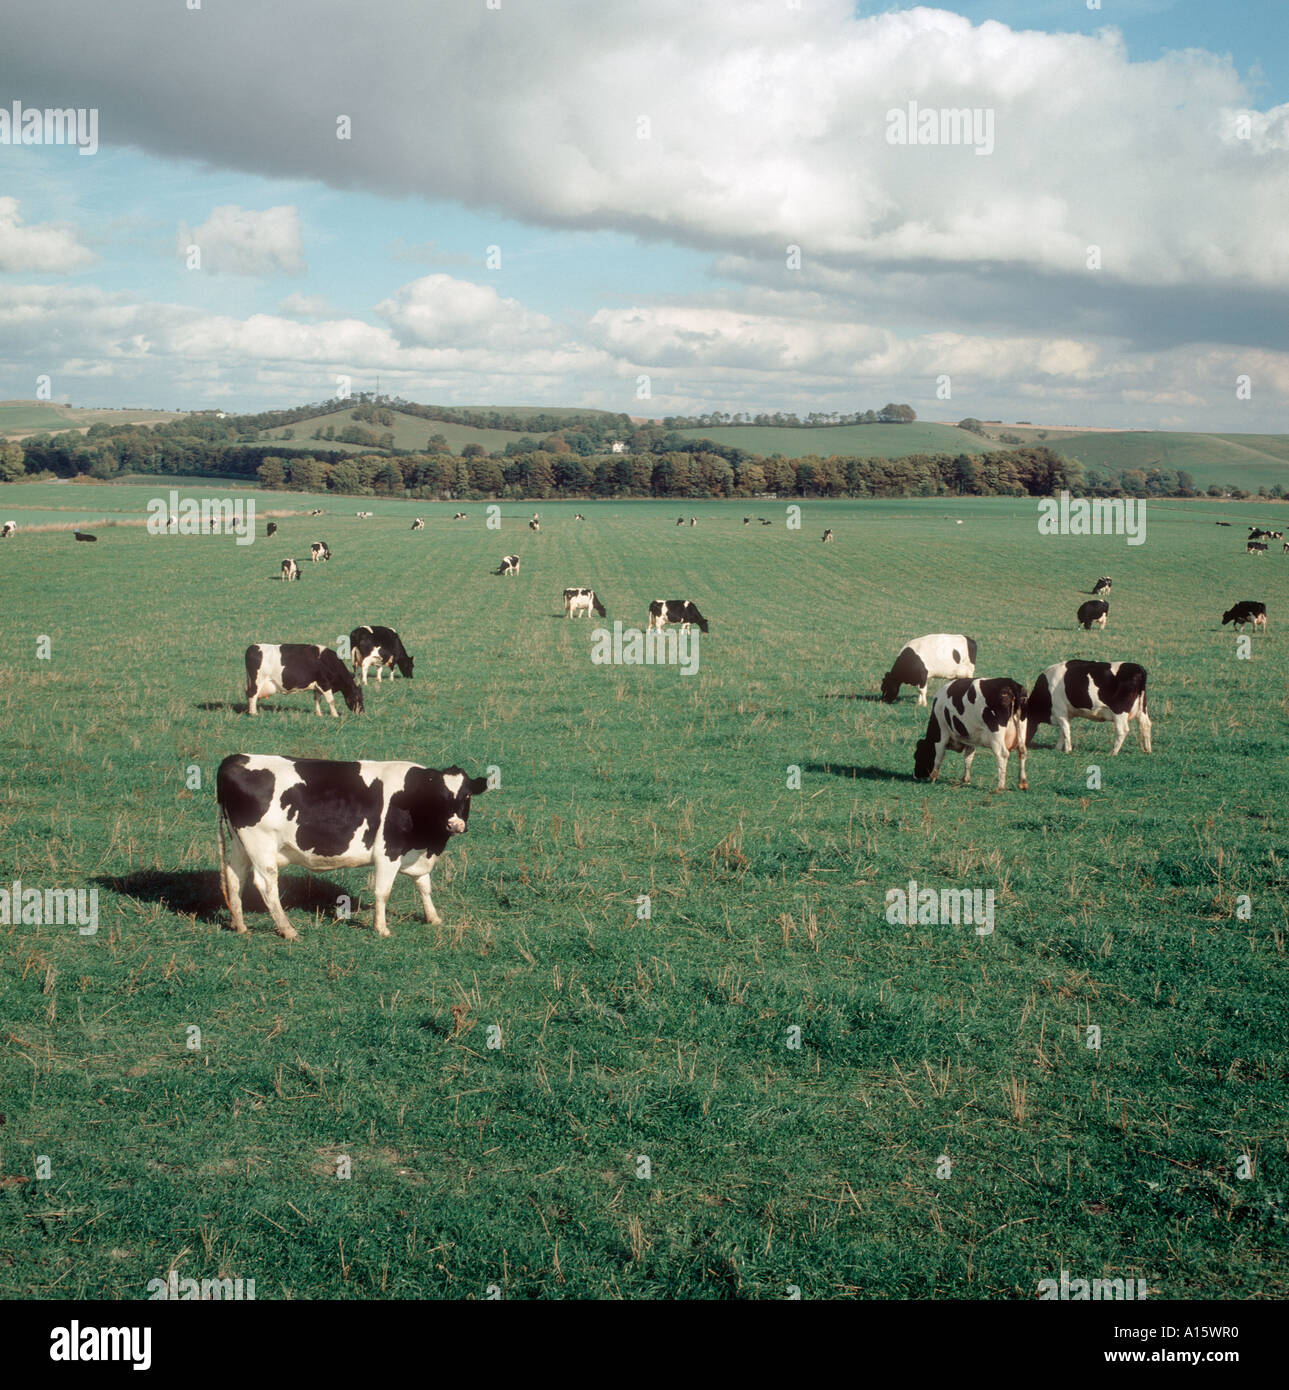 Dairy herd of Friesian x Holstein cows on large open pasture Stock Photo